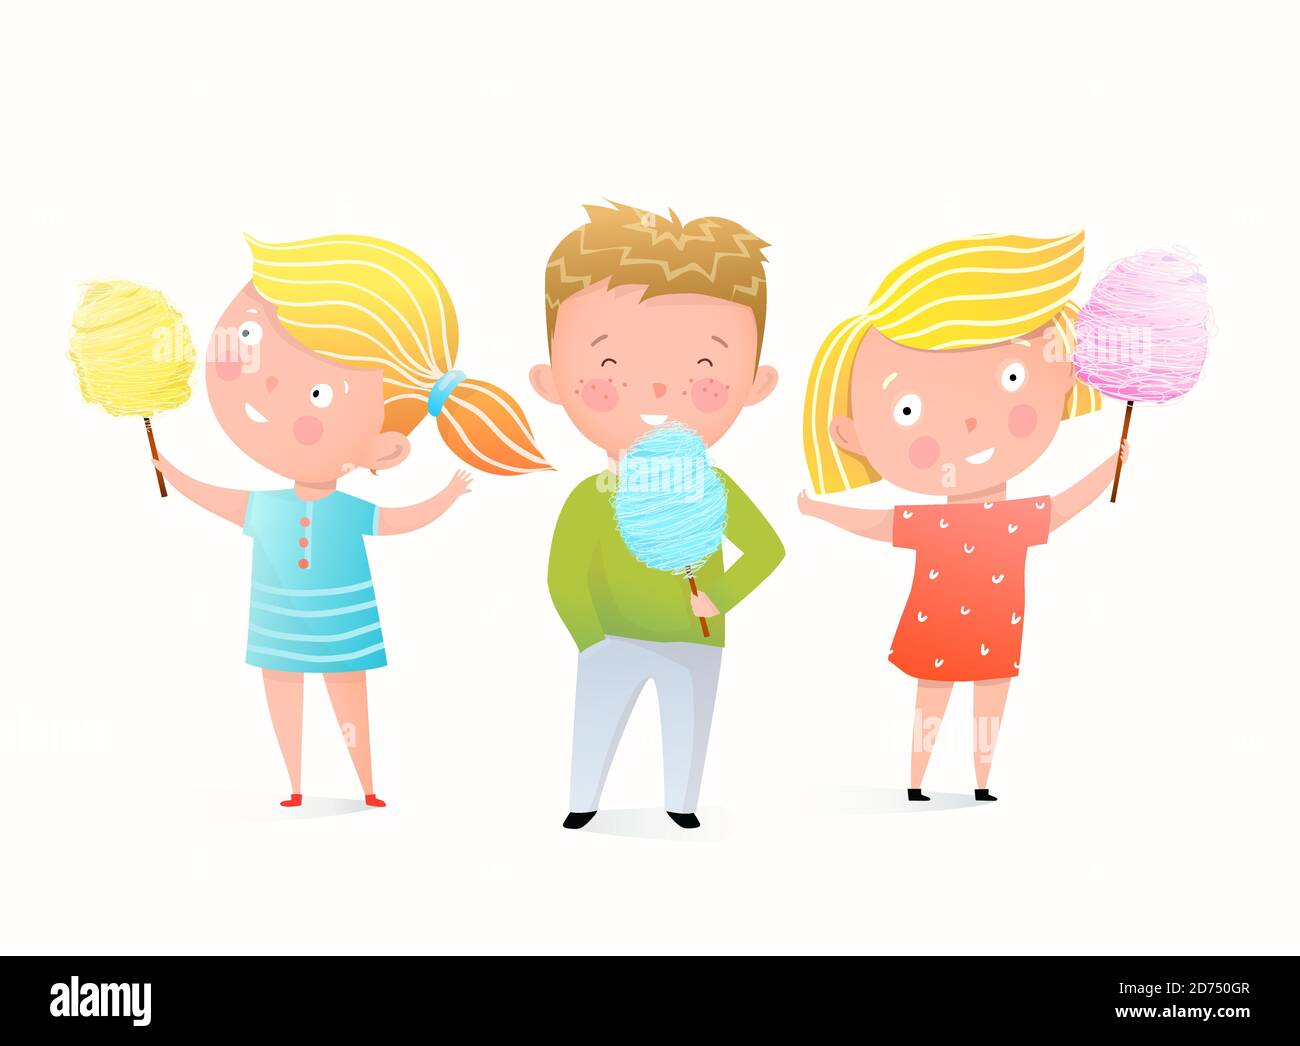 Cute little girls and a boy eating cotton candy, sweet street food banner design . Adorable children friends watercolor style vector. Stock Vector